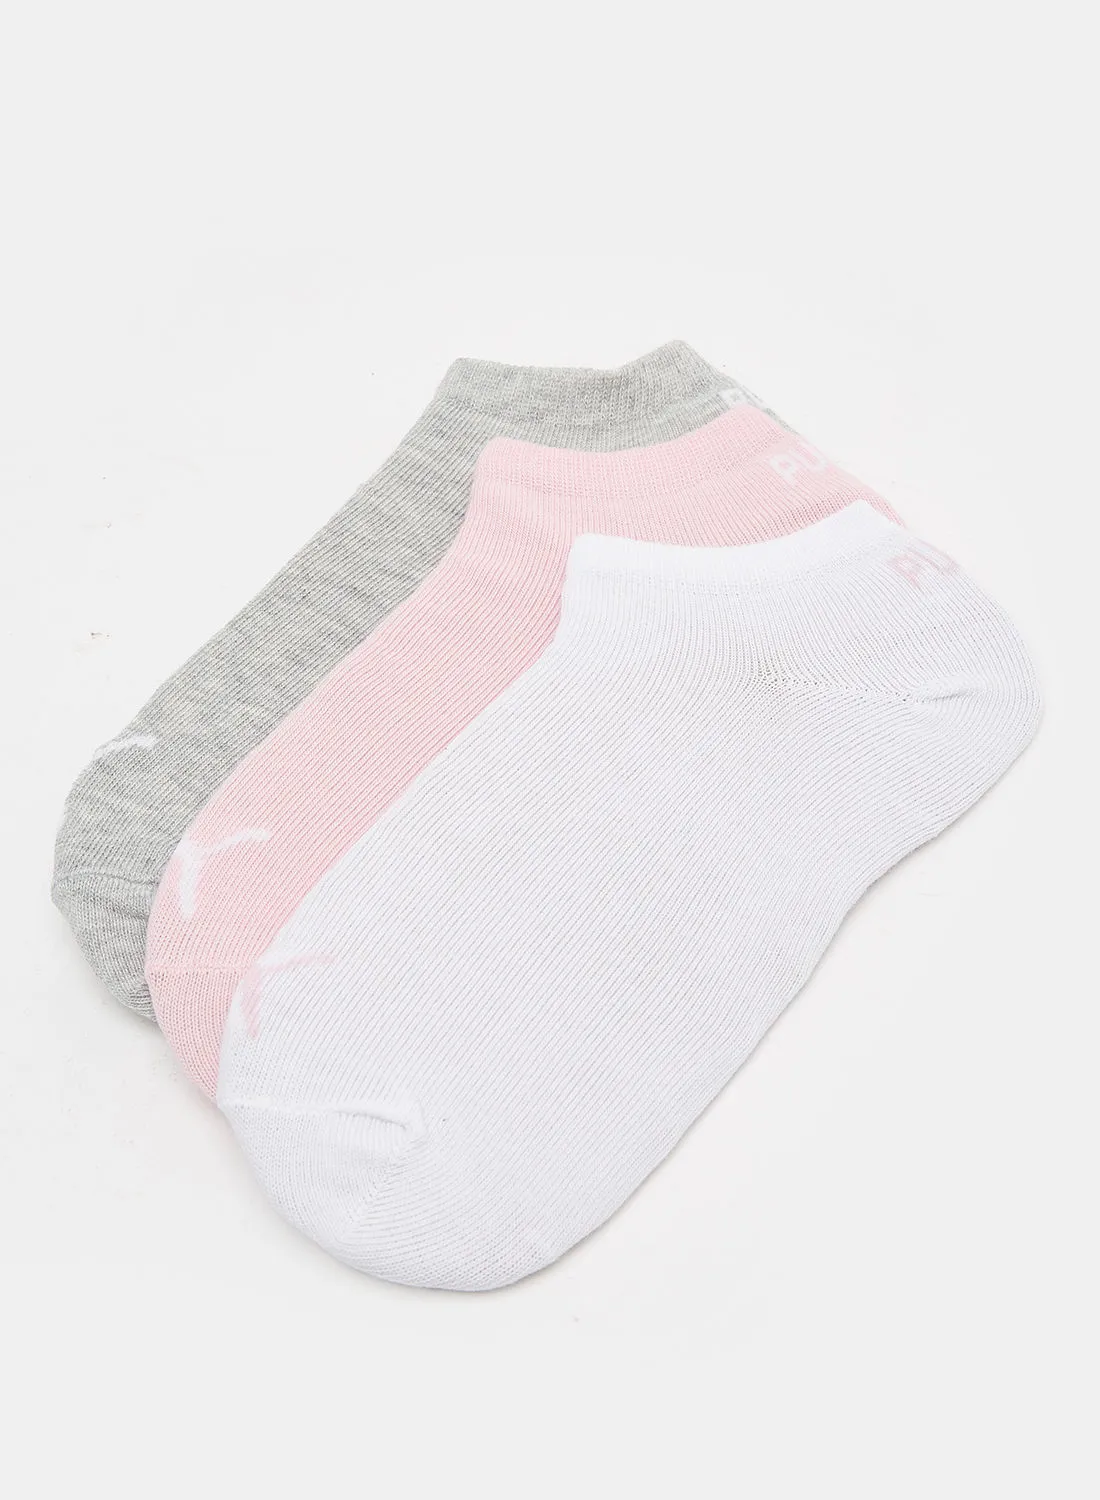 PUMA Boys Invisible Socks (Pack of 3)